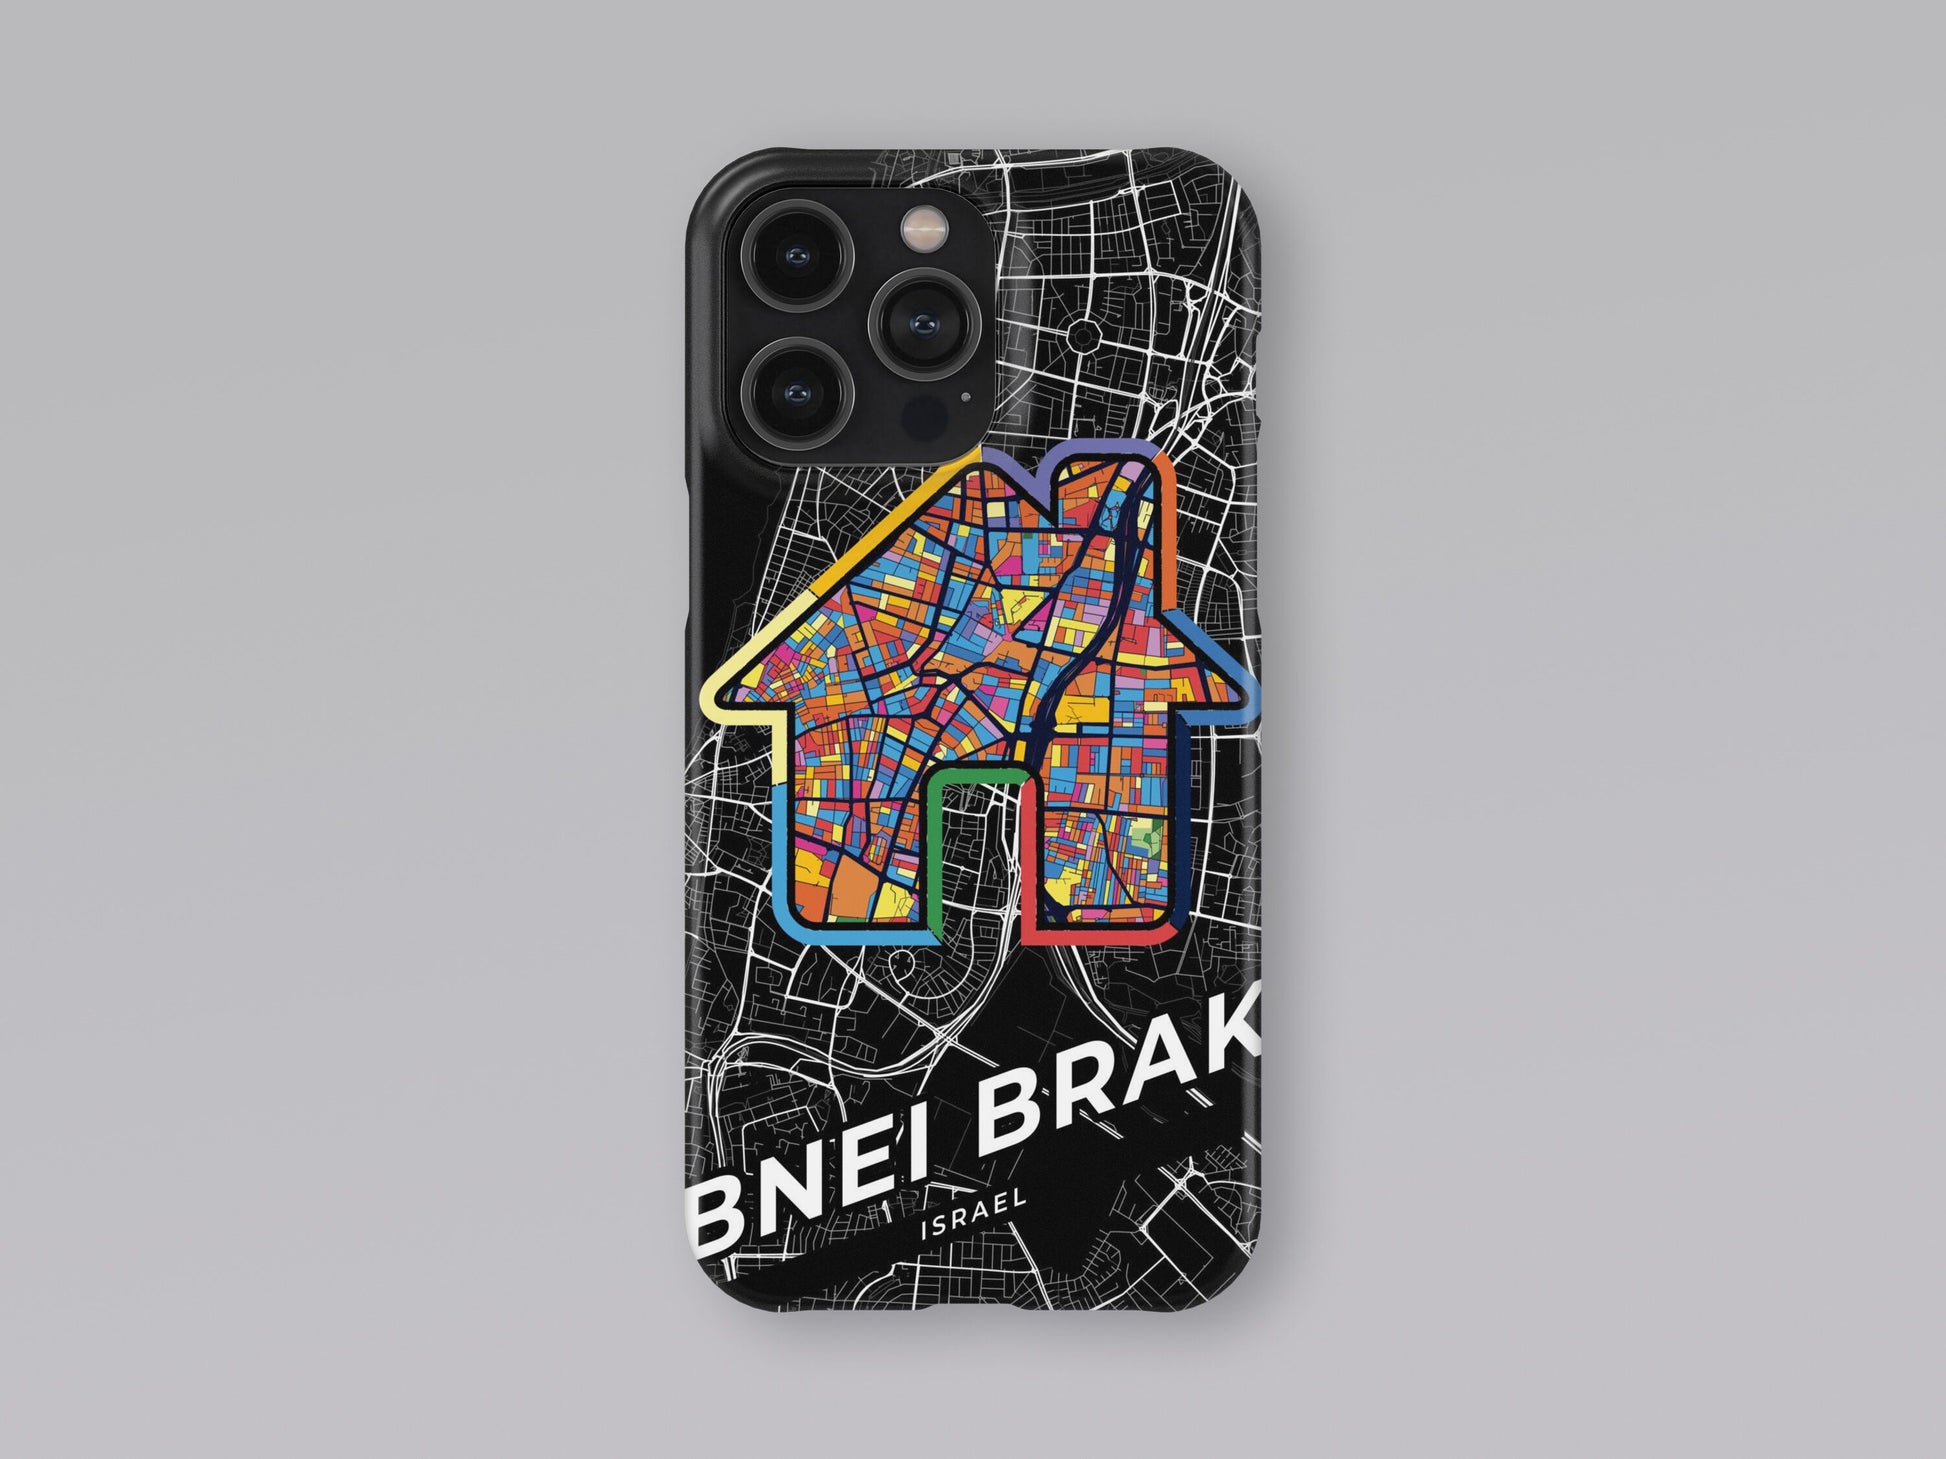 Bnei Brak Israel slim phone case with colorful icon. Birthday, wedding or housewarming gift. Couple match cases. 3